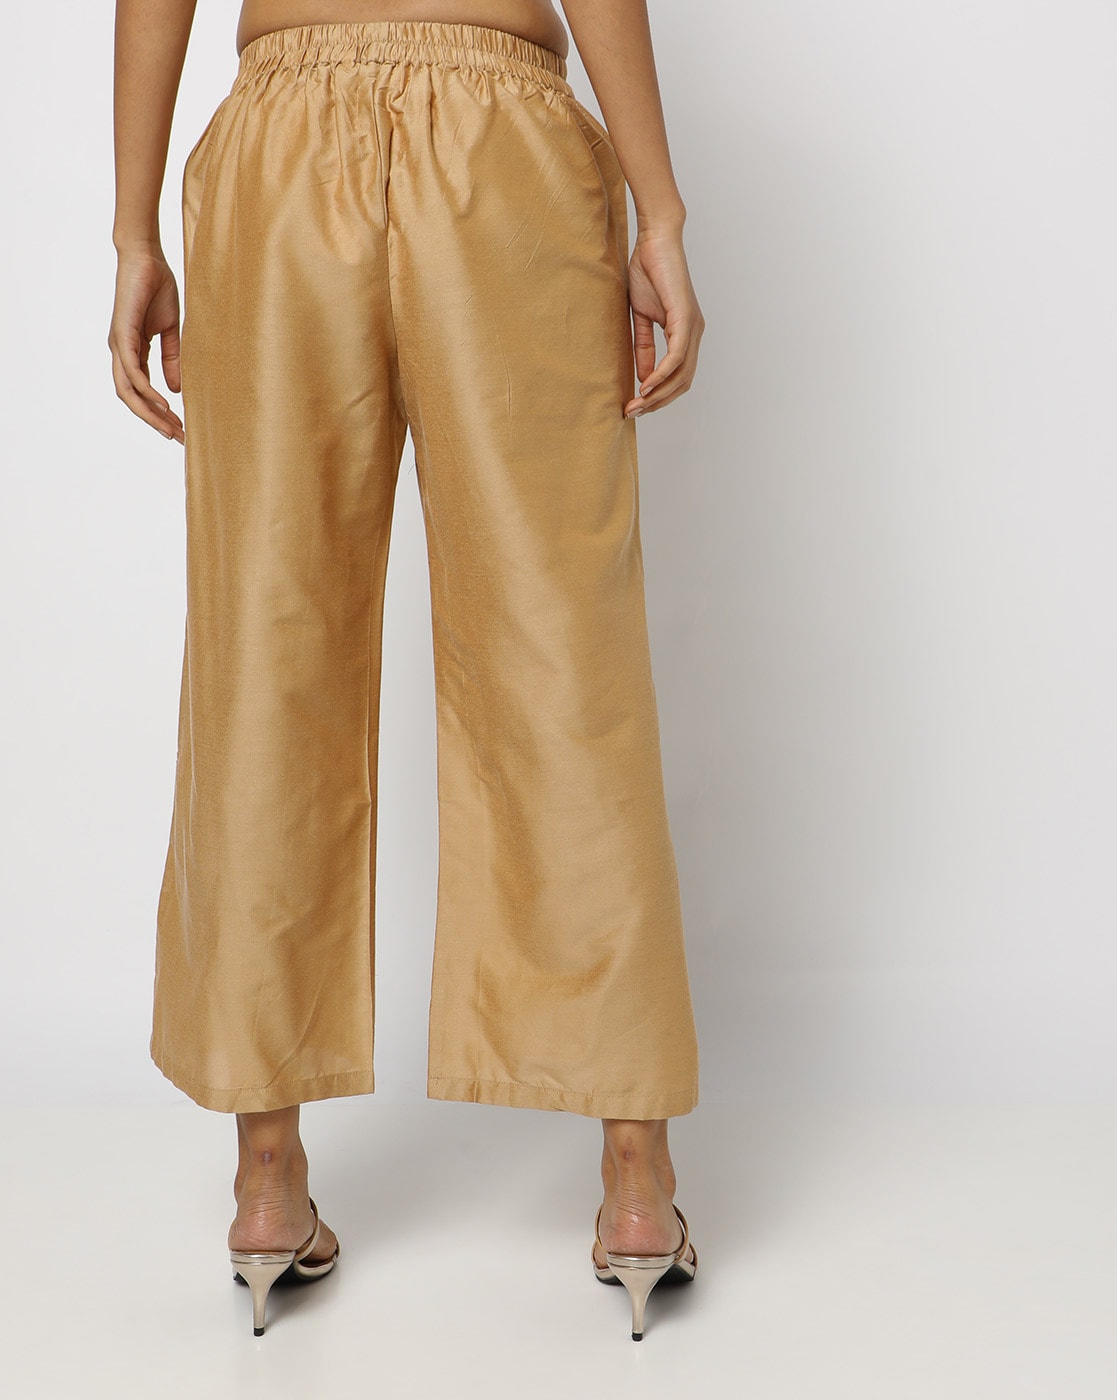 Amazon.com: Wide Leg Pants for Women Casual Summer Tie Front High Waisted  Split Solid Color Baggy Palazzo Comfy Flowy Trouser : Sports & Outdoors